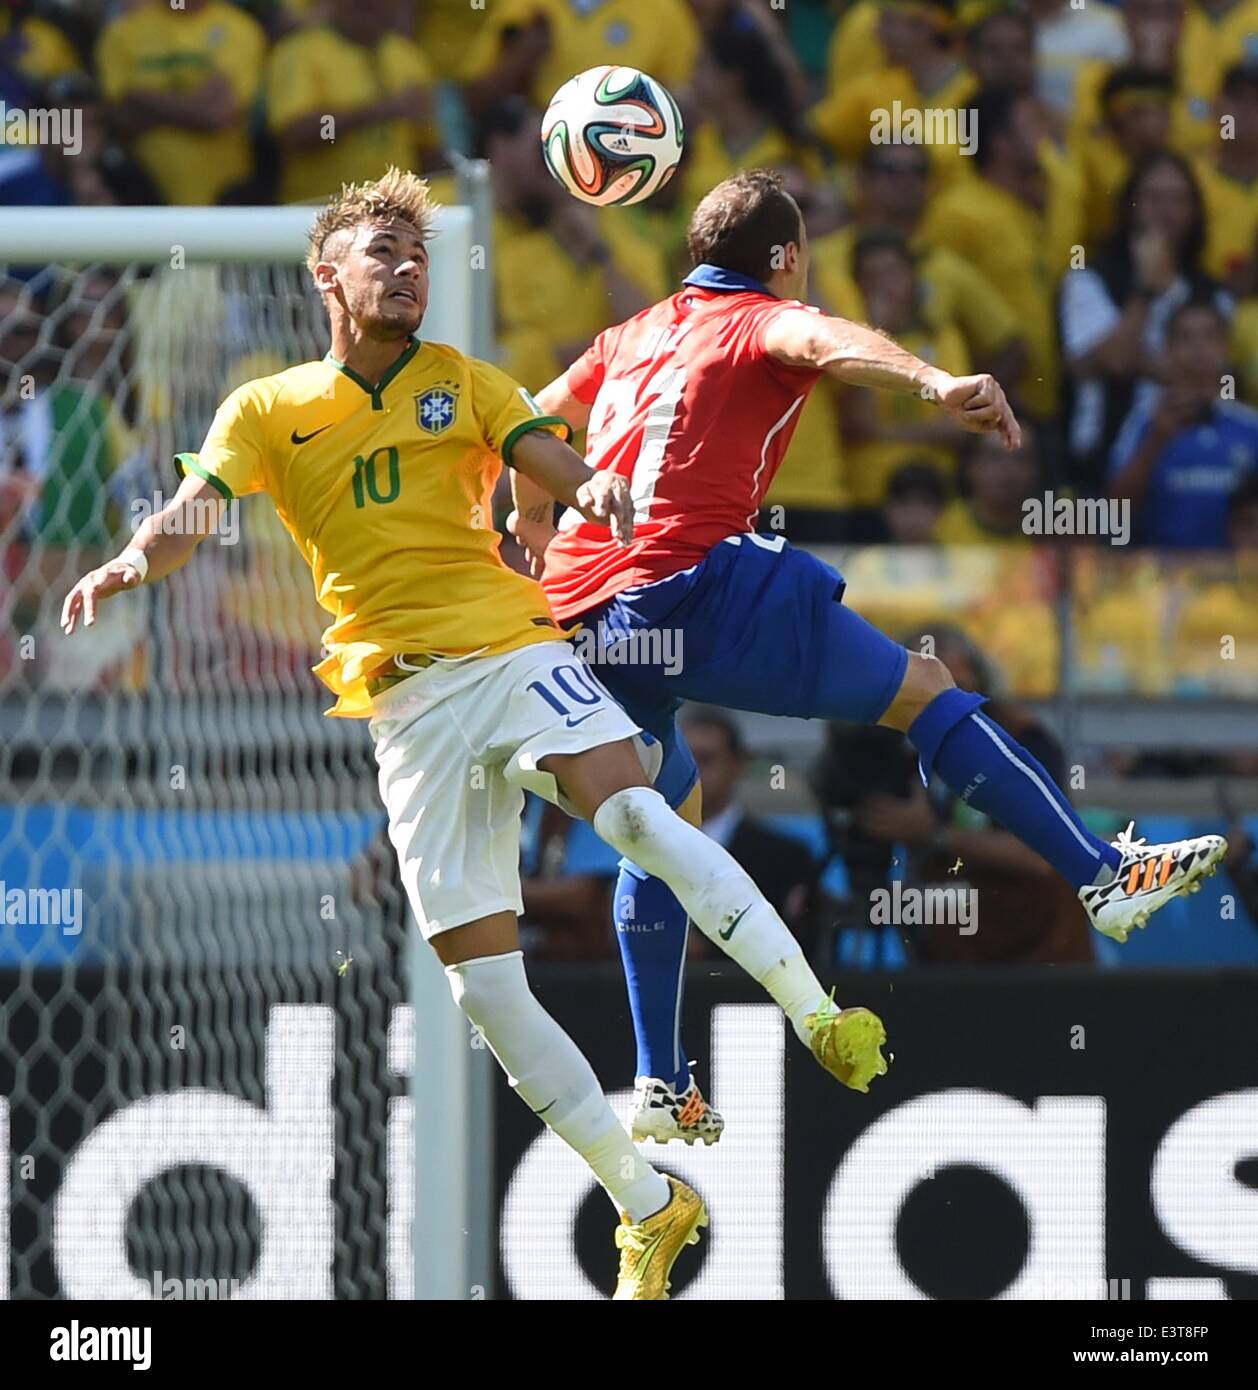 Belo Horizonte, Brazil. 28th June, 2014. Brazil's Neymar competes for a header with Chile's Marcelo Diaz during a Round of 16 match between Brazil and Chile of 2014 FIFA World Cup at the Estadio Mineirao Stadium in Belo Horizonte, Brazil, on June 28, 2014. Credit:  Liu Dawei/Xinhua/Alamy Live News Stock Photo